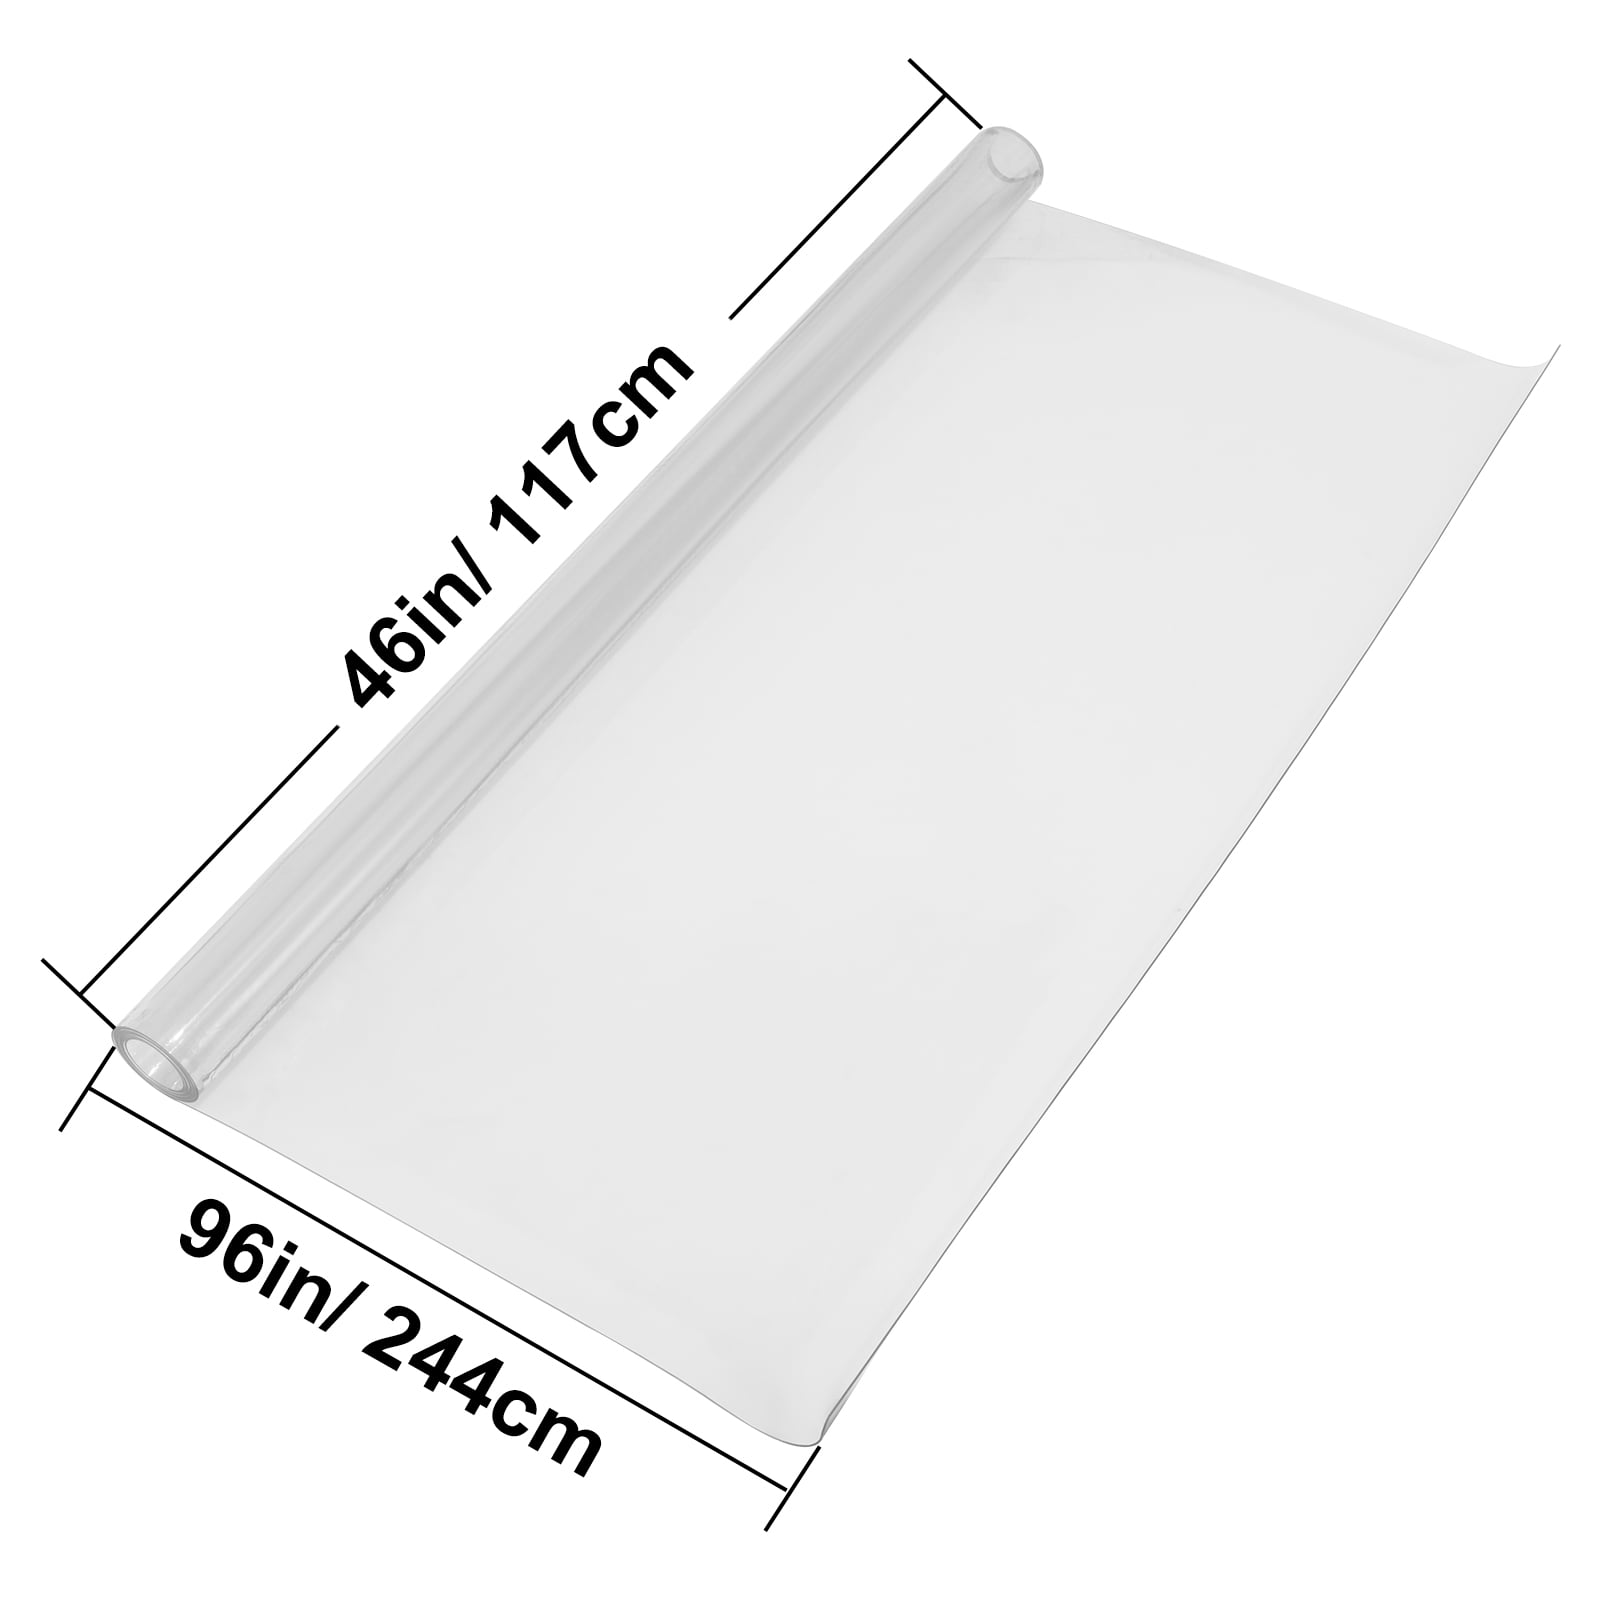 Dropship VEVOR 80 X 42 Inch Clear Table Cover Protector, 2mm Thick